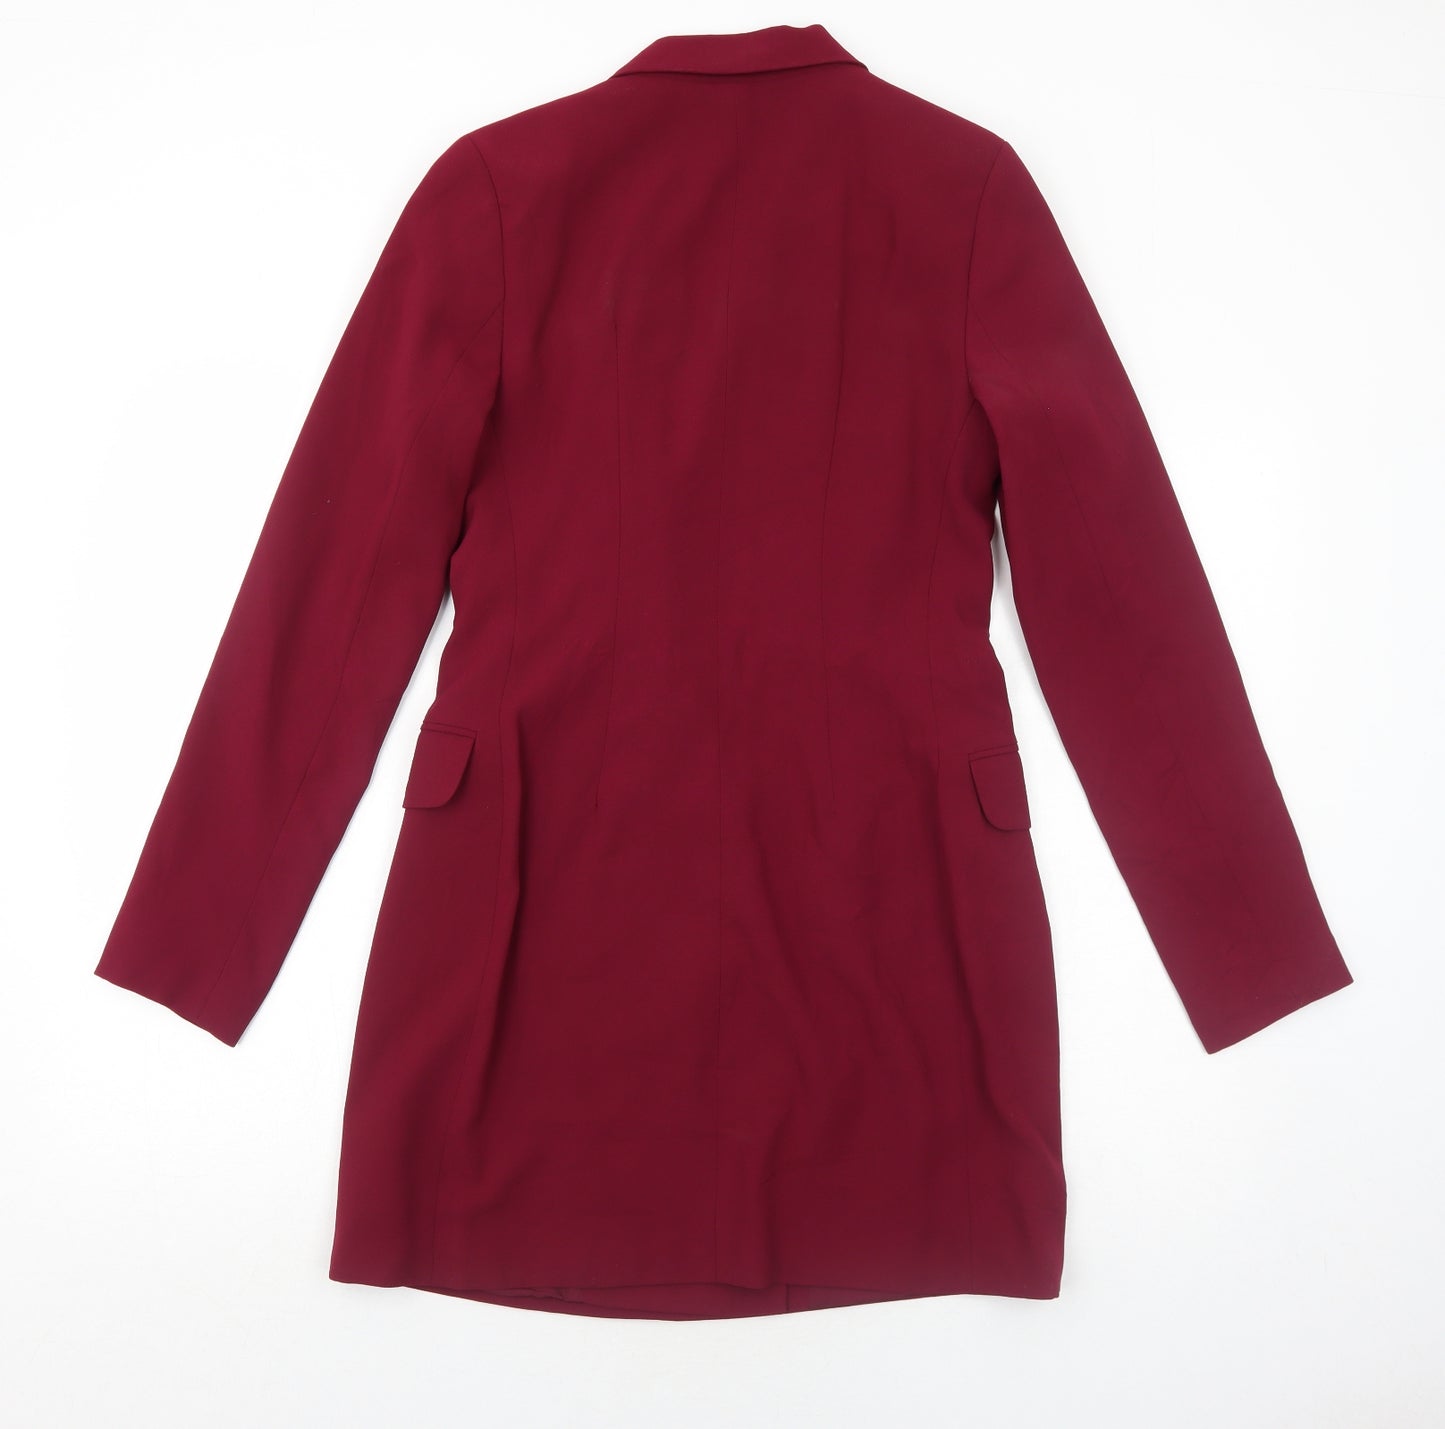 Bershka Womens Red Polyester Jacket Dress Size M Collared Button